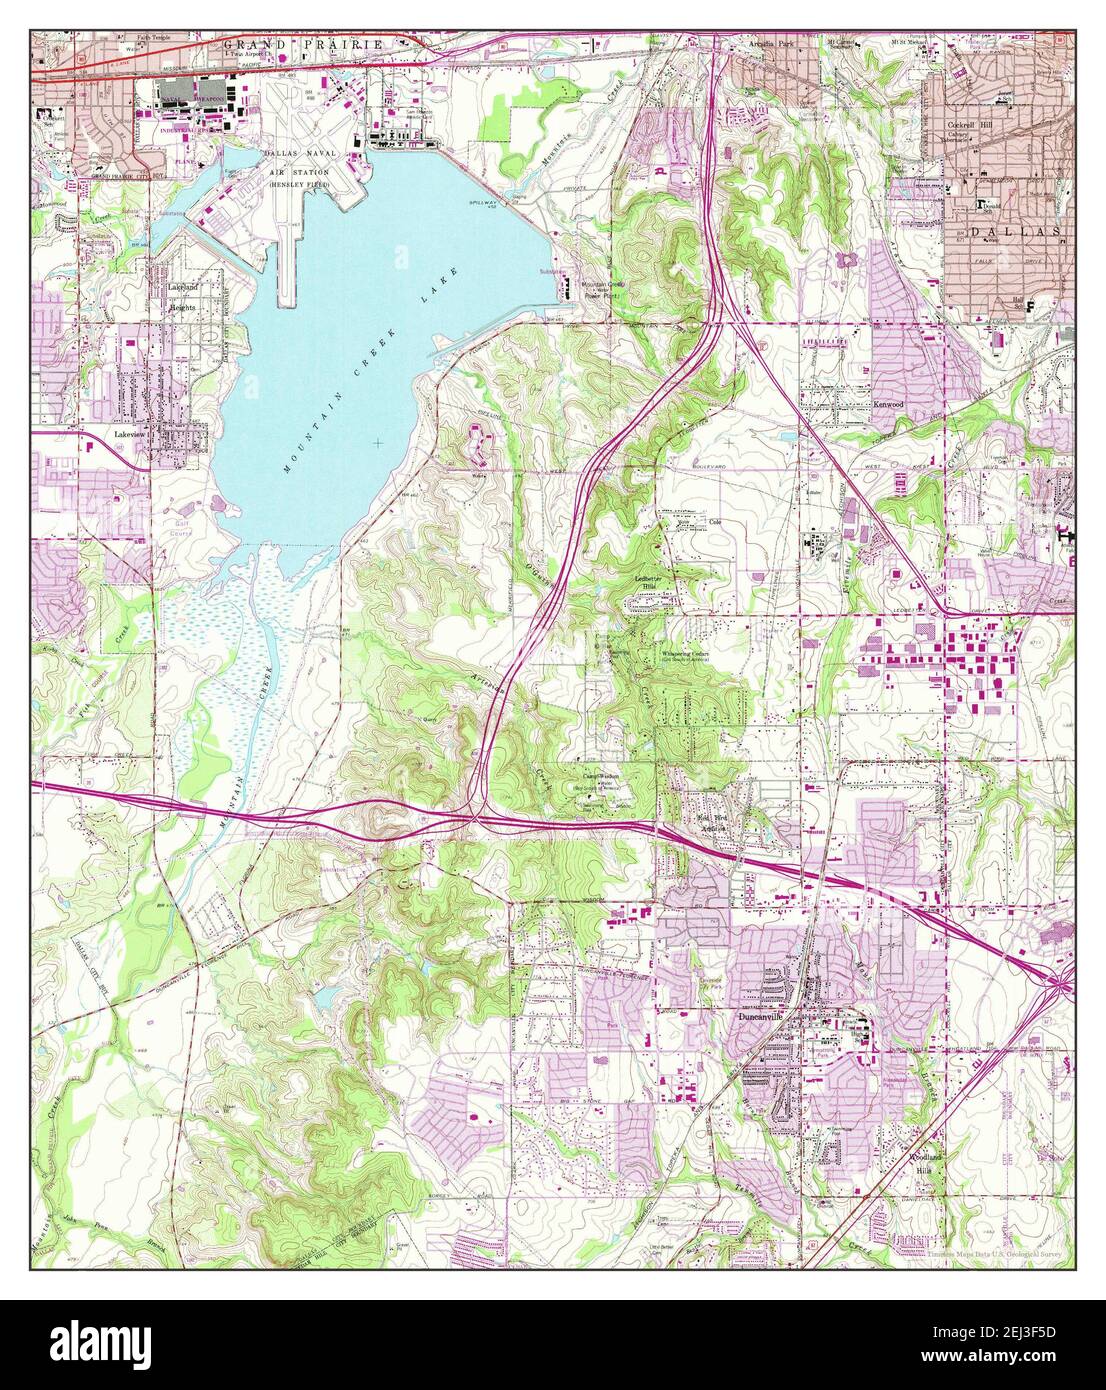 Duncanville, Texas, map 1959, 1:24000, United States of America by Timeless Maps, data U.S. Geological Survey Stock Photo